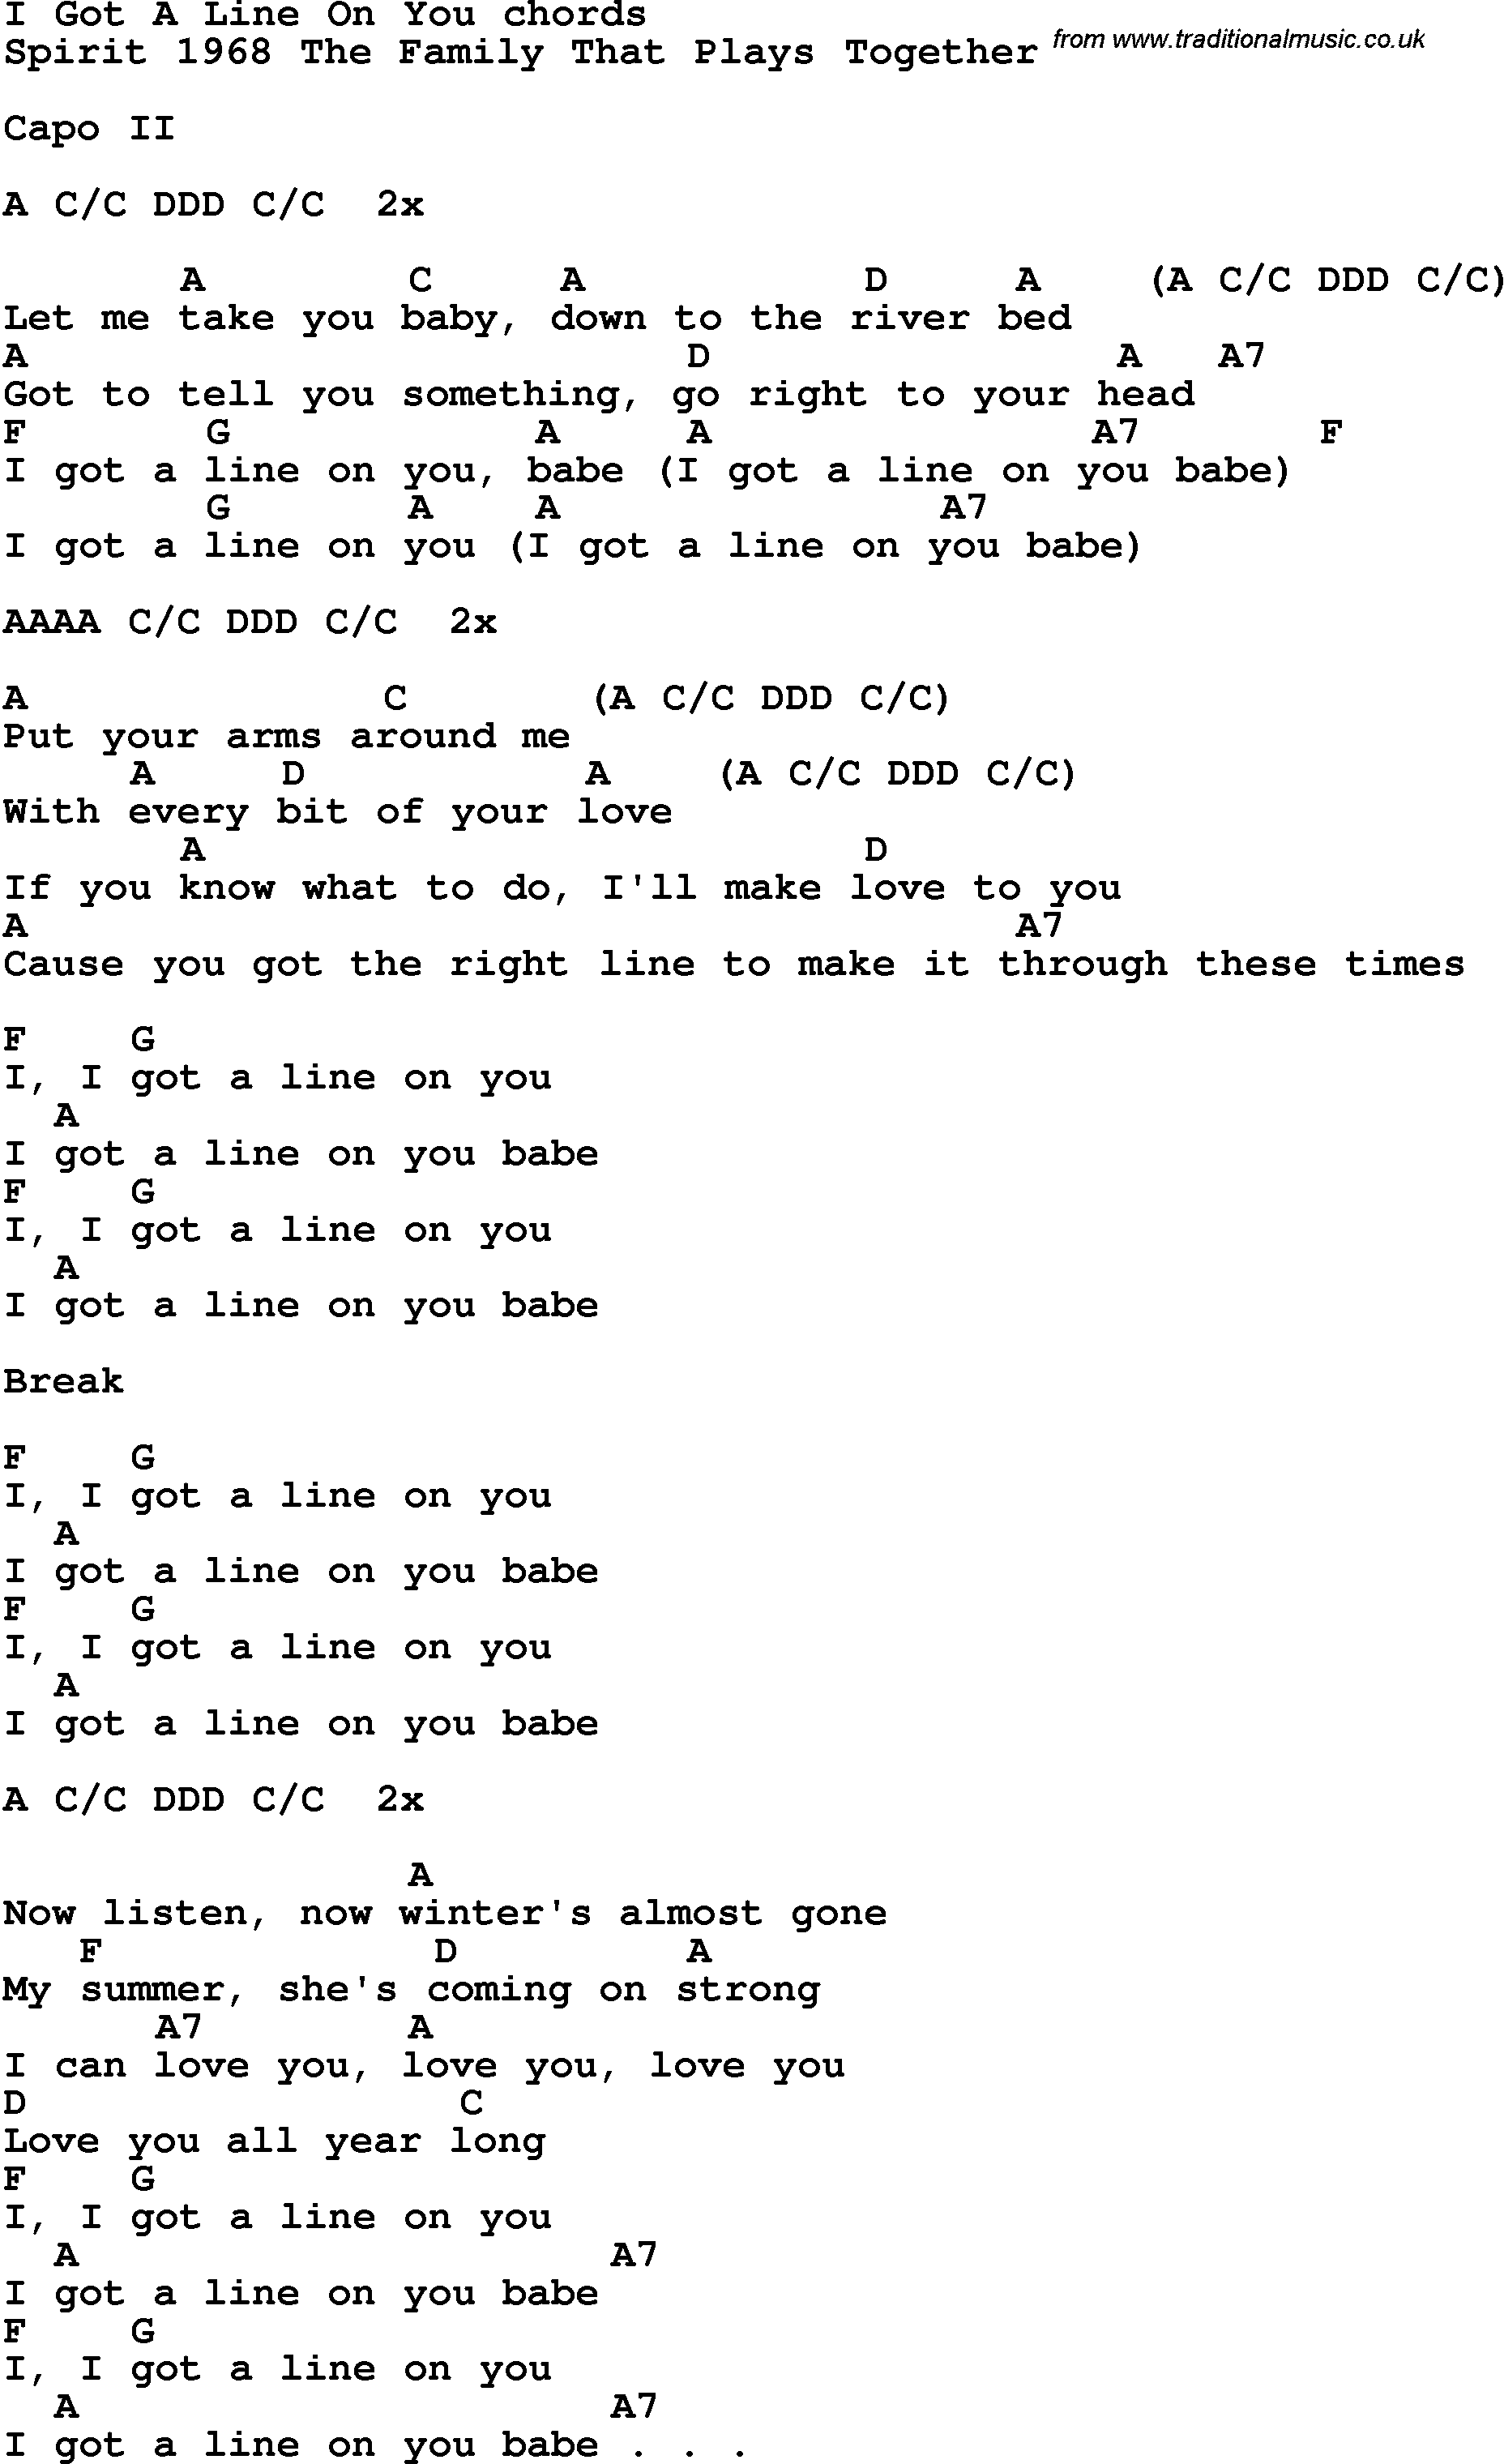 Song Lyrics with guitar chords for I Got A Line On You